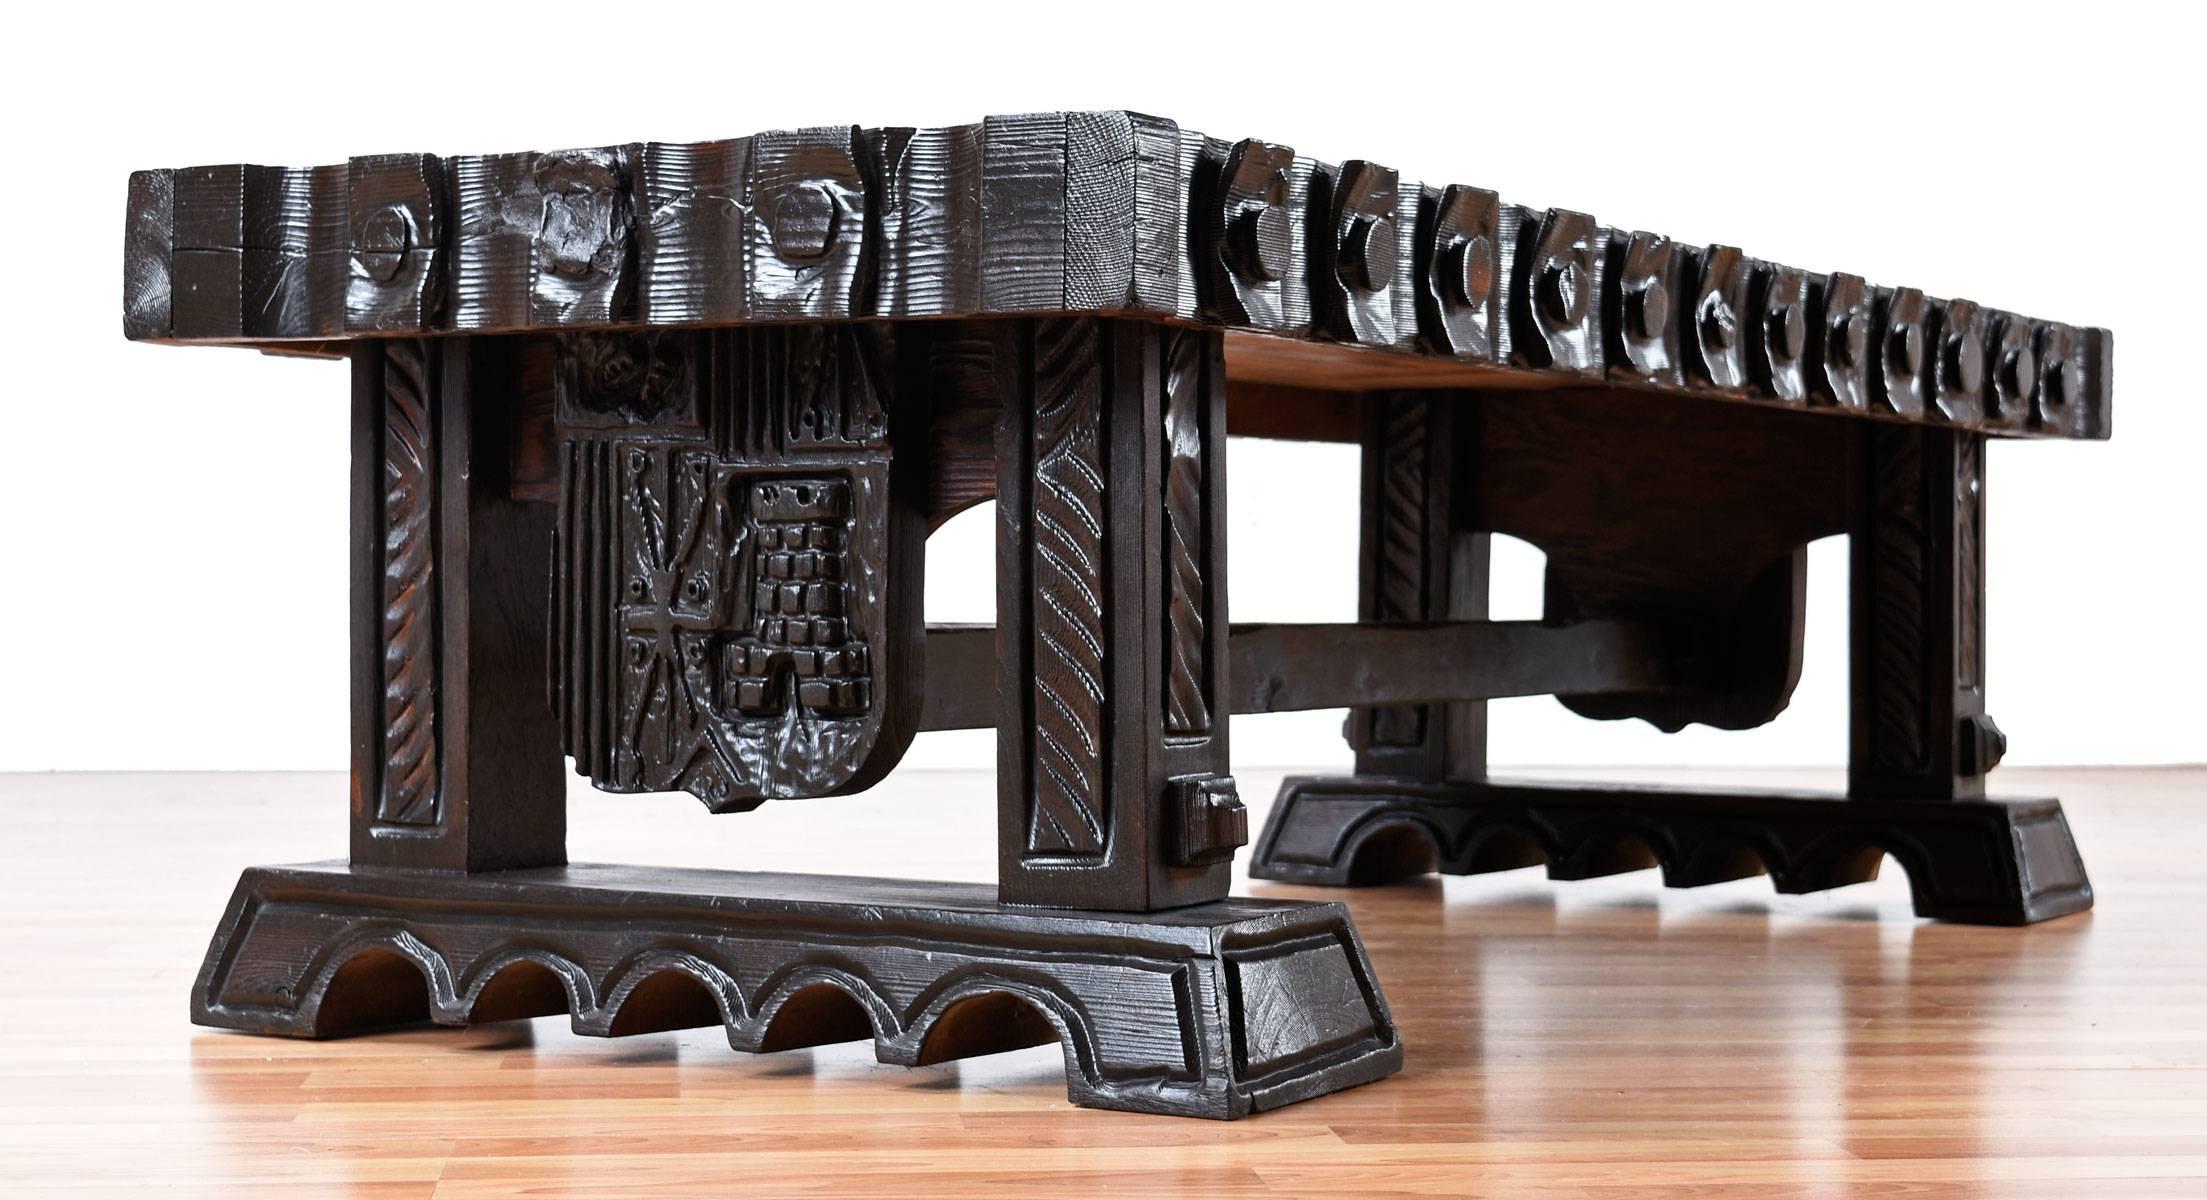 Polynesian inspired ornately carved tiki coffee table possibly made by a Witco employee who worked in the 1960s under William Westenhaver. The deep carvings along the top of the coffee table are filled with amber resin and has a crackle texture to